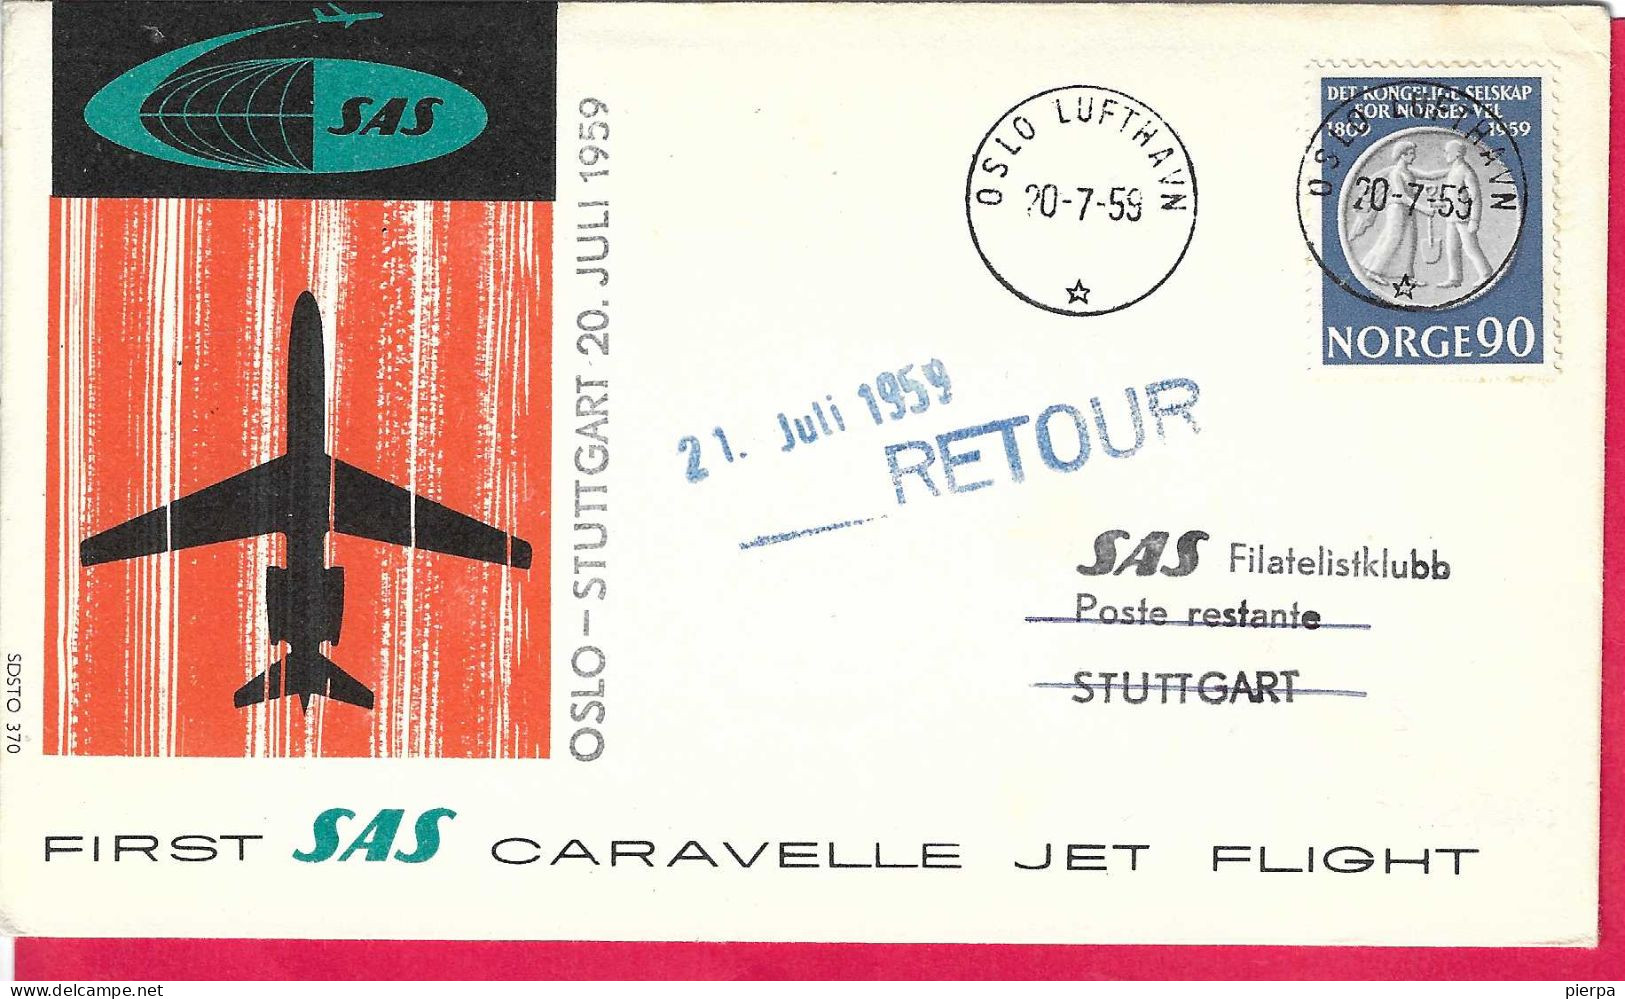 NORGE - FIRST SAS CARAVELLE FLIGHT - FROM OSLO TO STUTTGART *20.7.59* ON OFFICIAL COVER - Briefe U. Dokumente